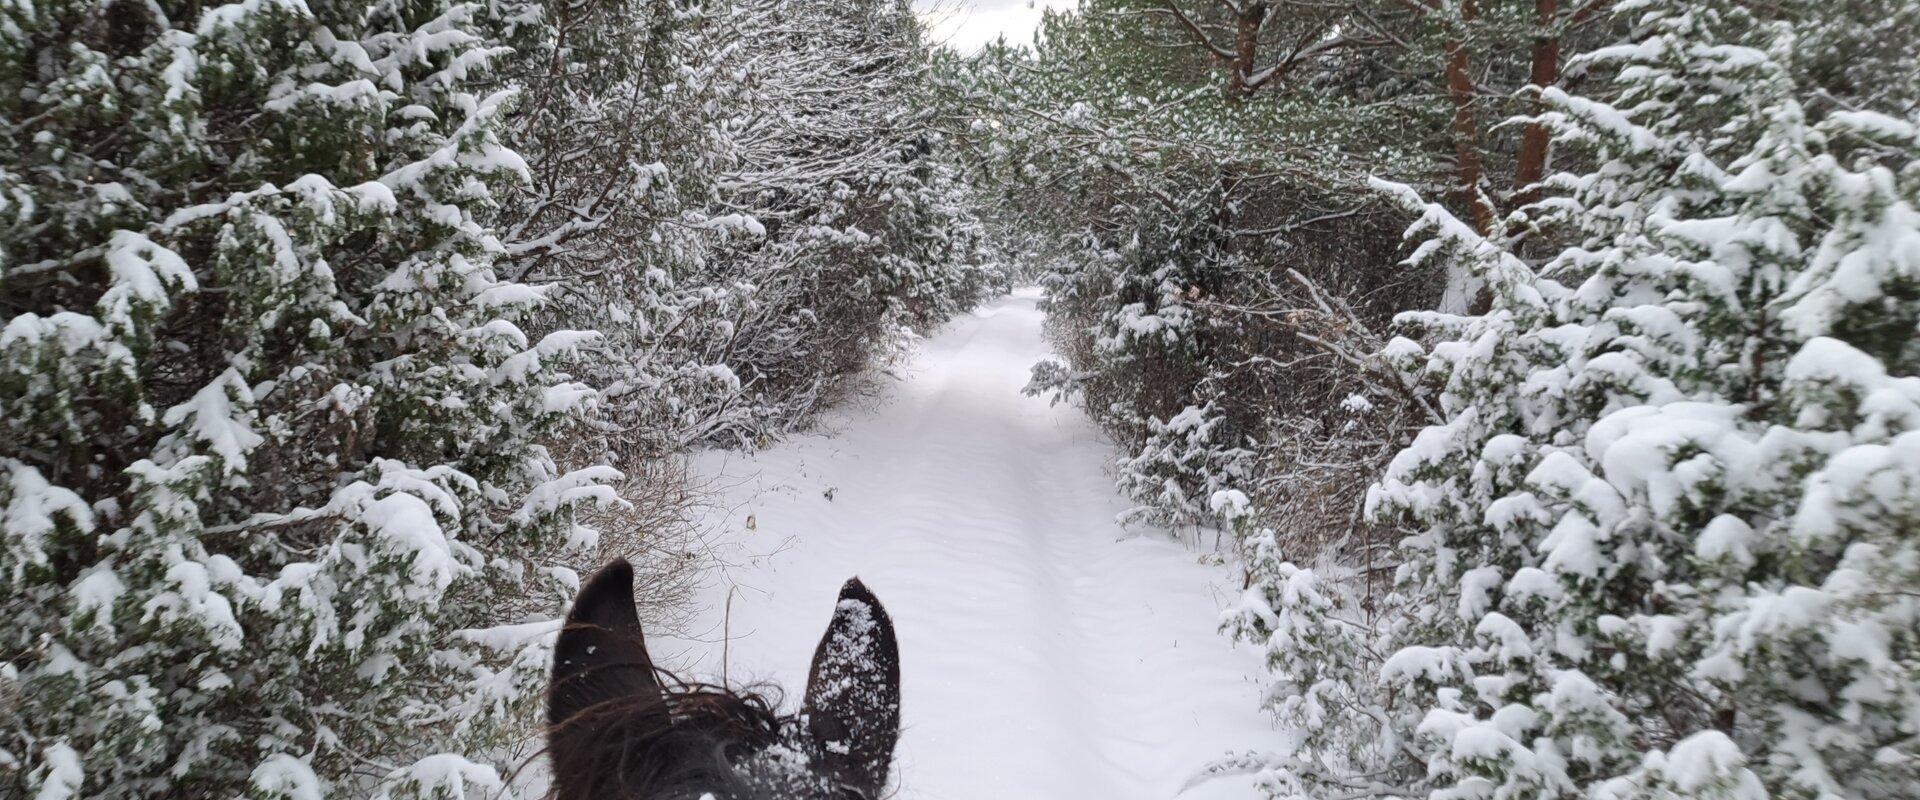 On a wintry forest road with horses